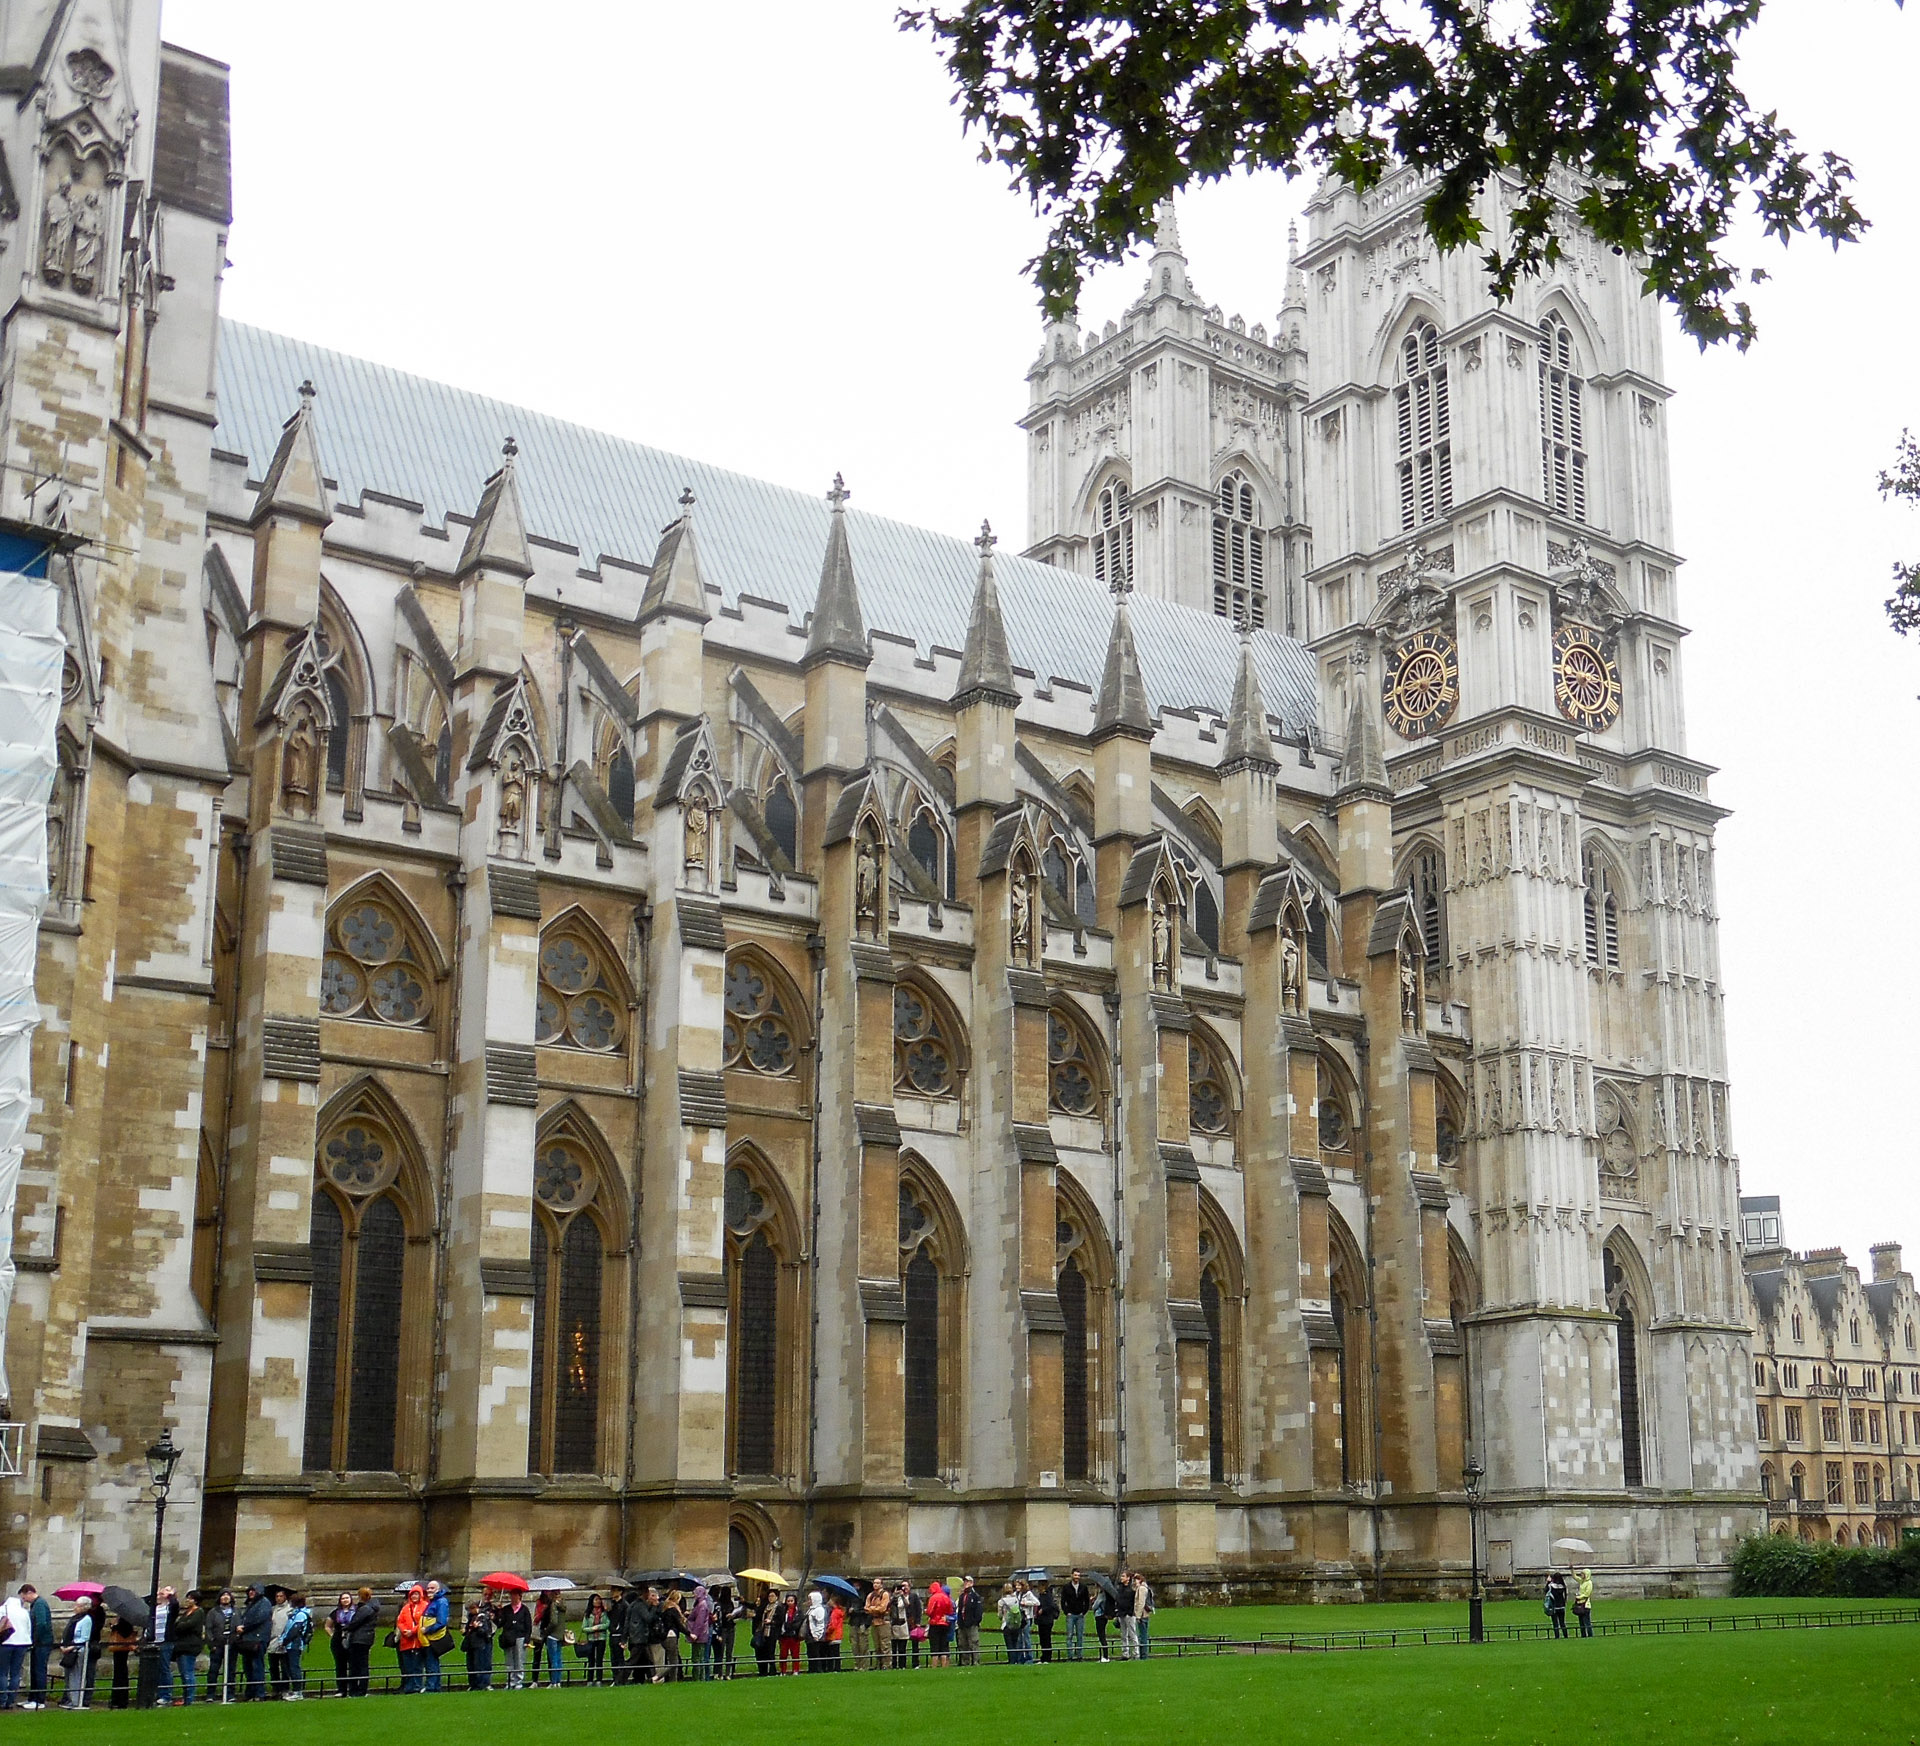 At Westminster Abbey in London